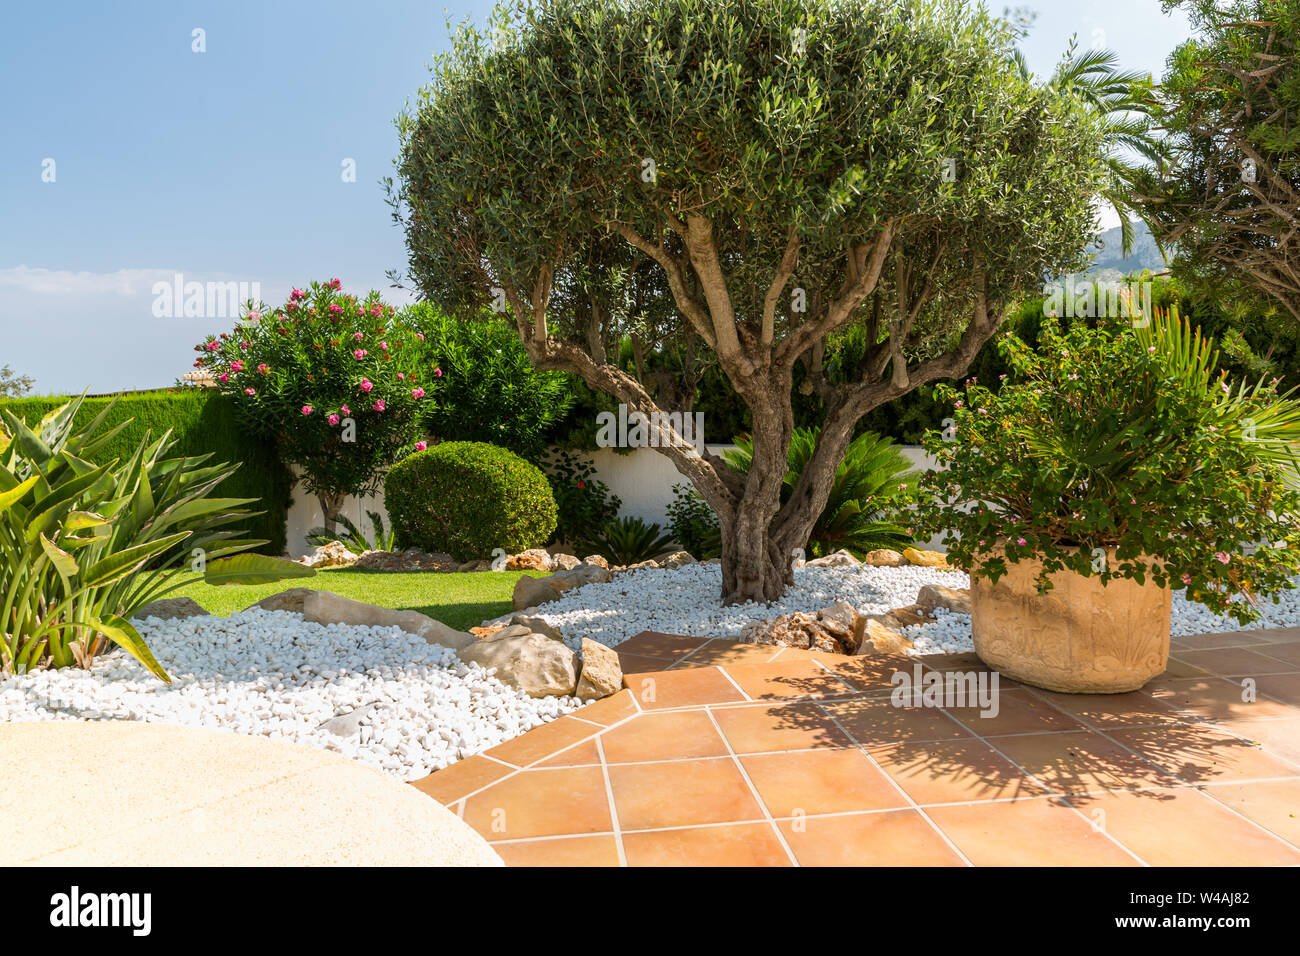 Mediterranean garden with olive tree, plants and garden path Stock Photo -  Alamy